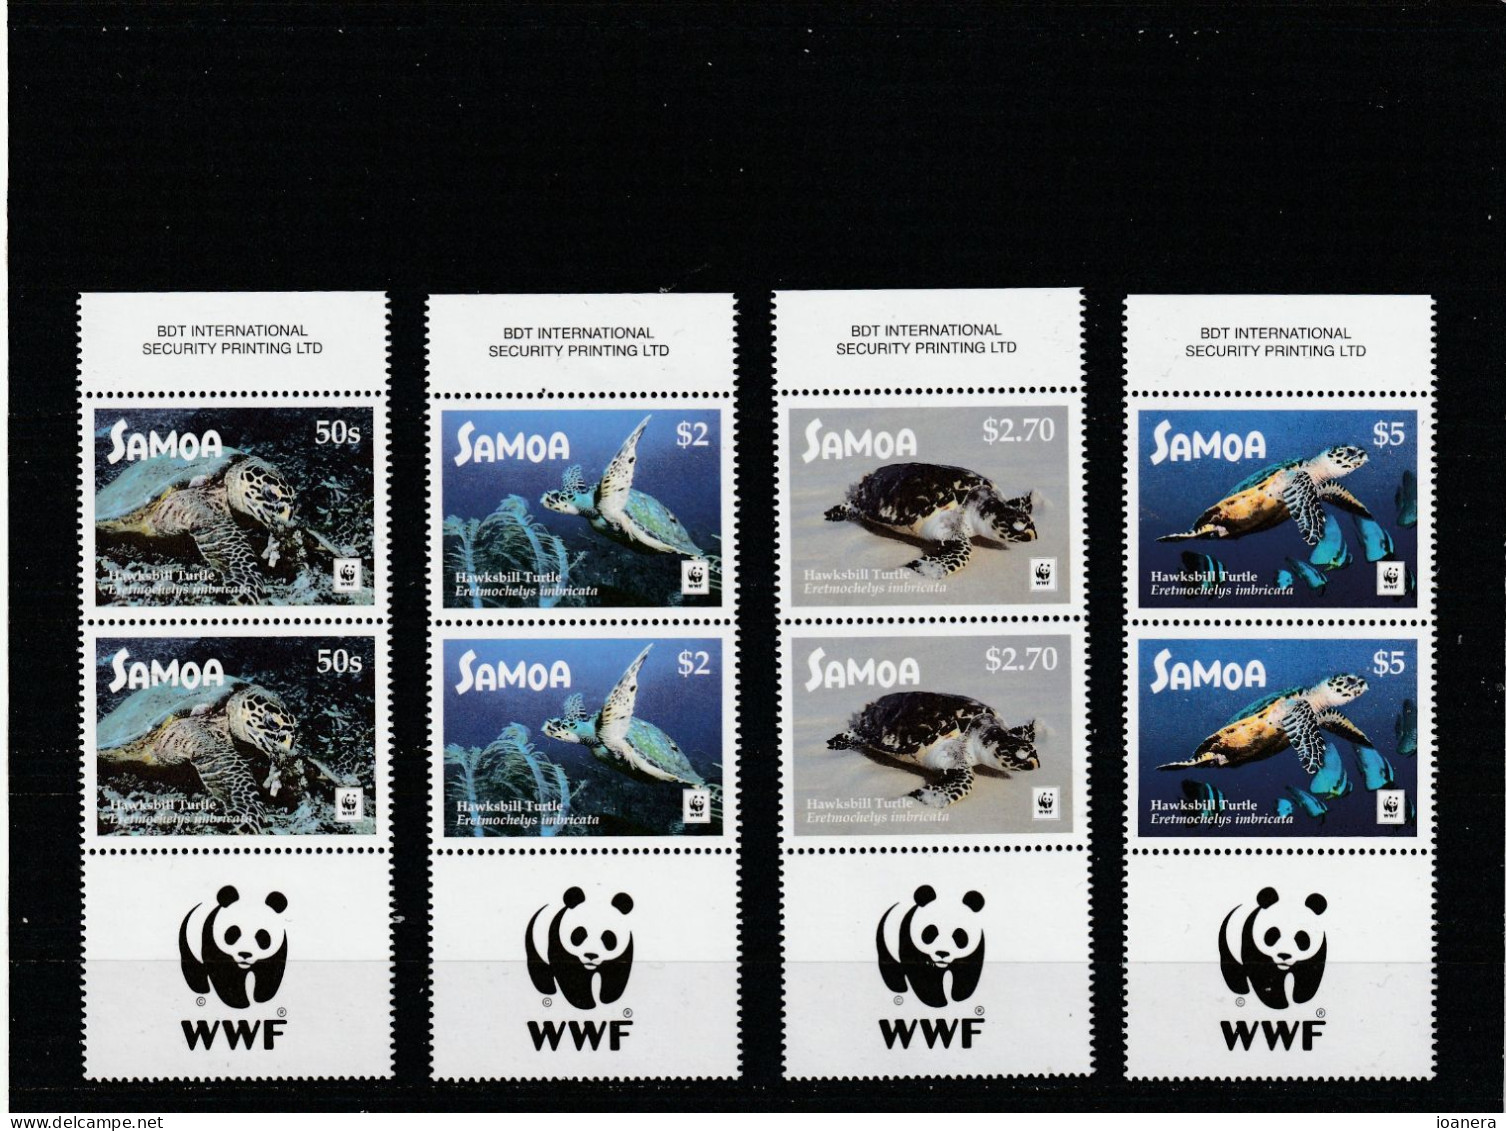 Samoa 2016 - WWF,Fauna,Reptiles,Turtles,series 4 Values And Serie 4 Valies With,vignette,perforated,MNH,Mi.Bl1352-1355KB - Samoa